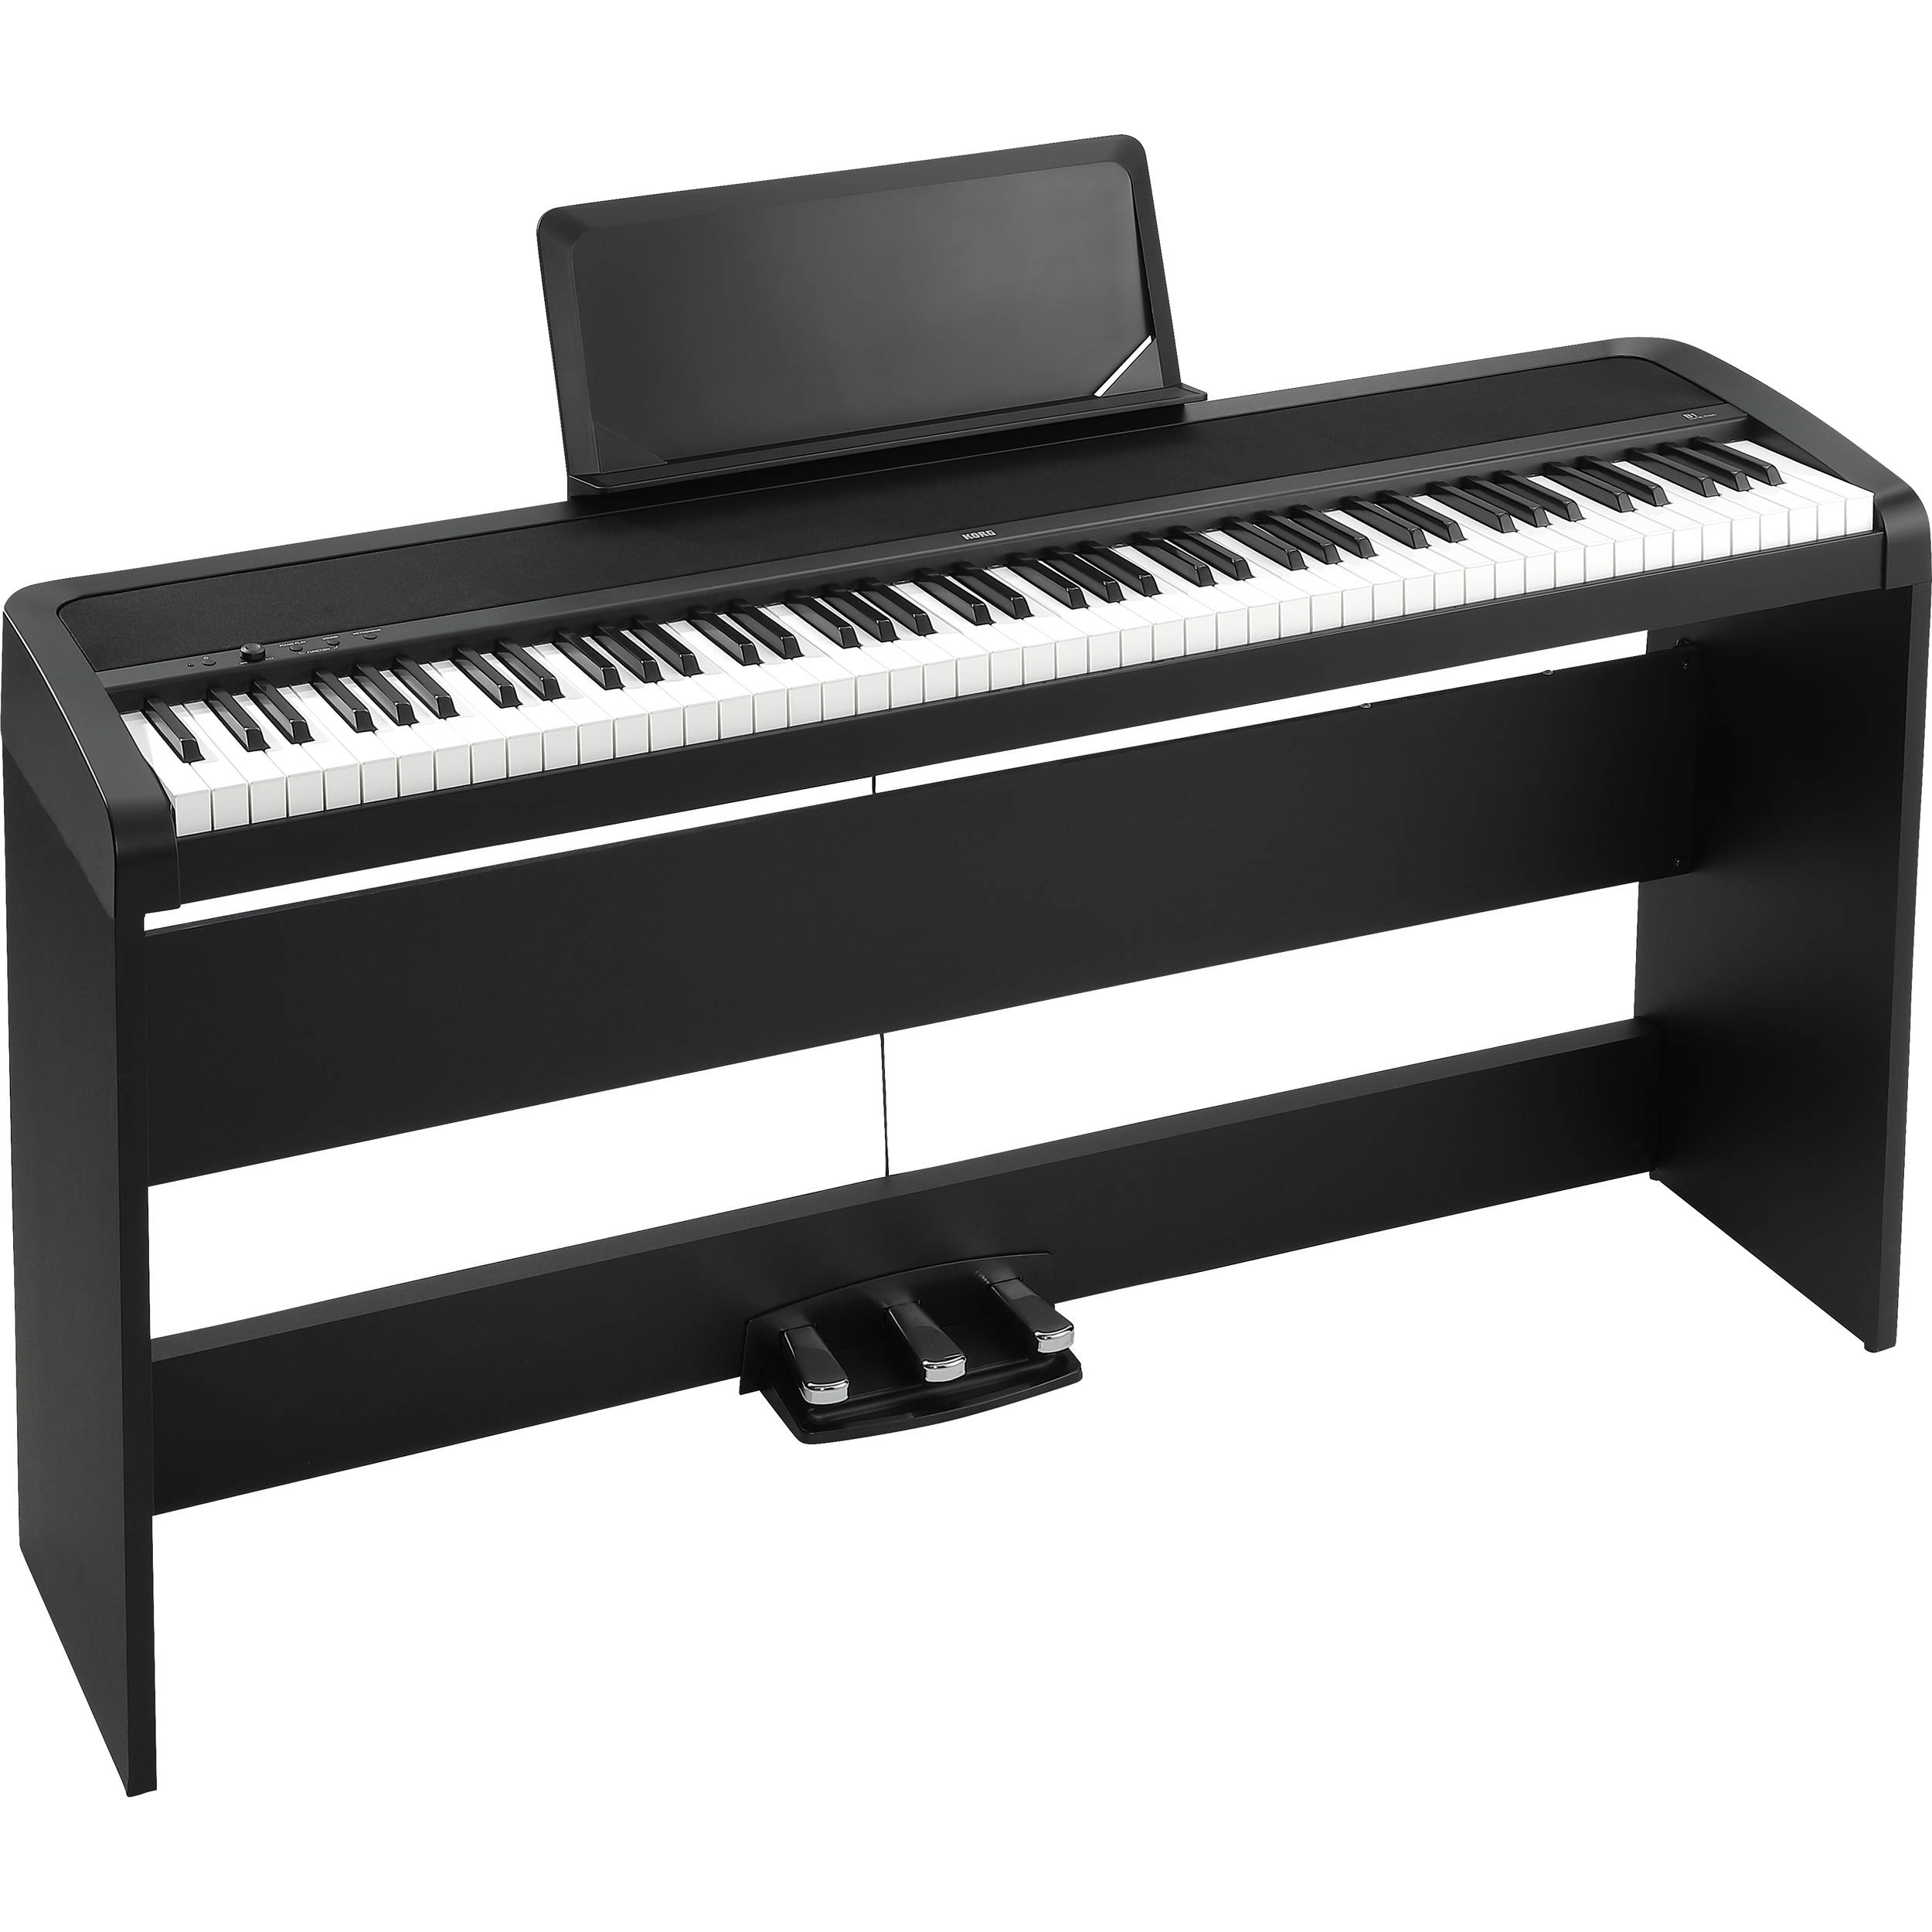 Korg B1SP - Digital Piano with Stand and Pedalboard B1SPBK B&H